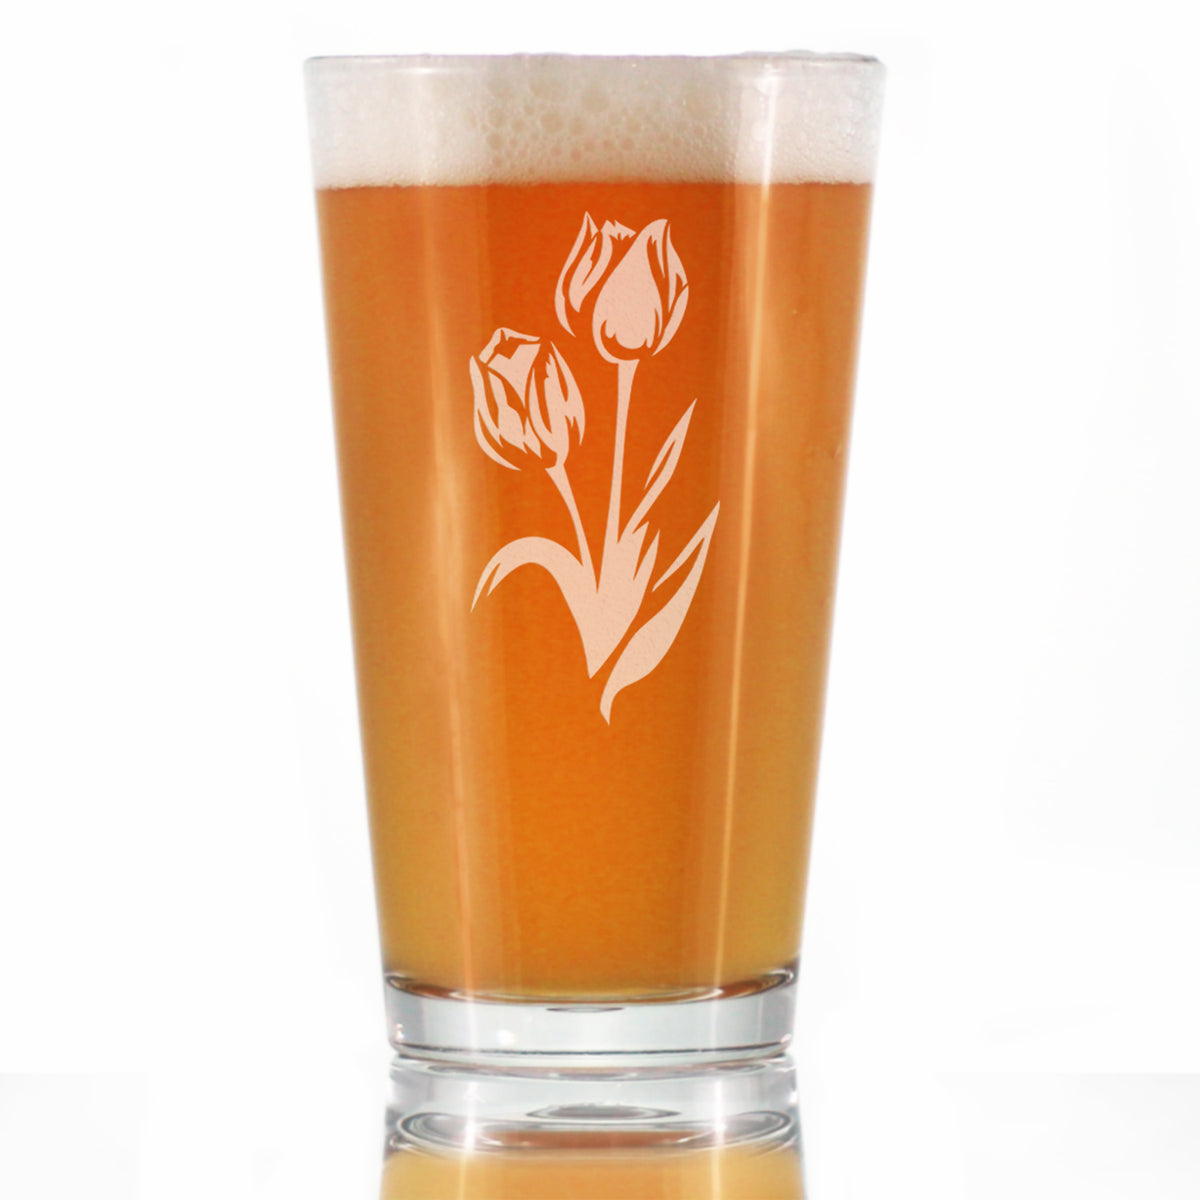 Tulip Pint Glass for Beer - Floral Themed Decor and Gifts for Flower Lovers - 16 oz Glasses